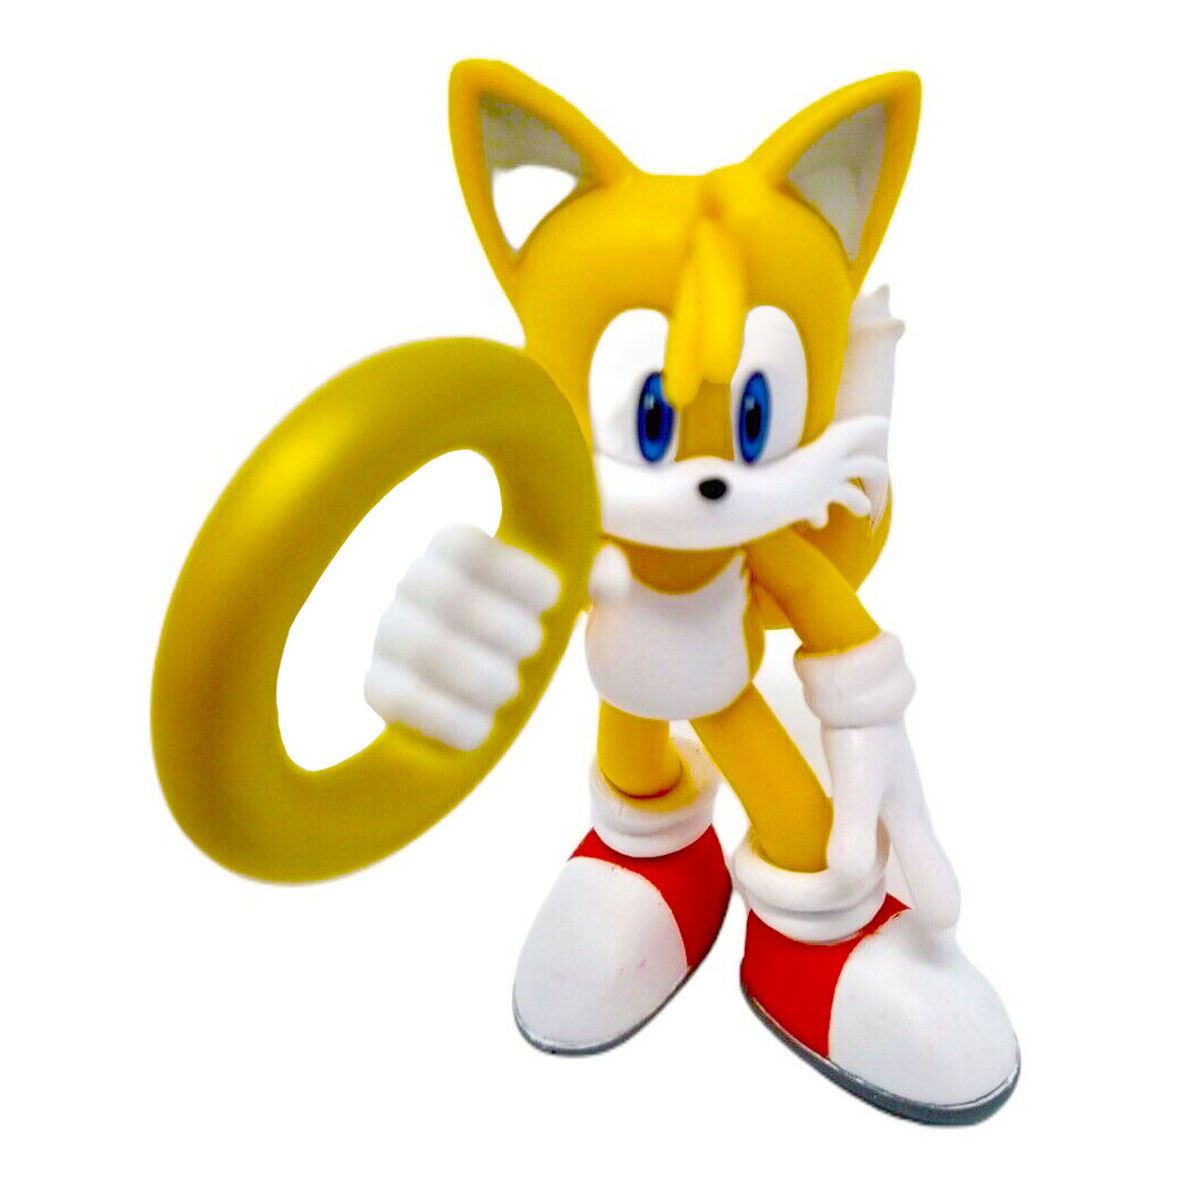 A new holiday-themed update, which included Tails - The Sonic